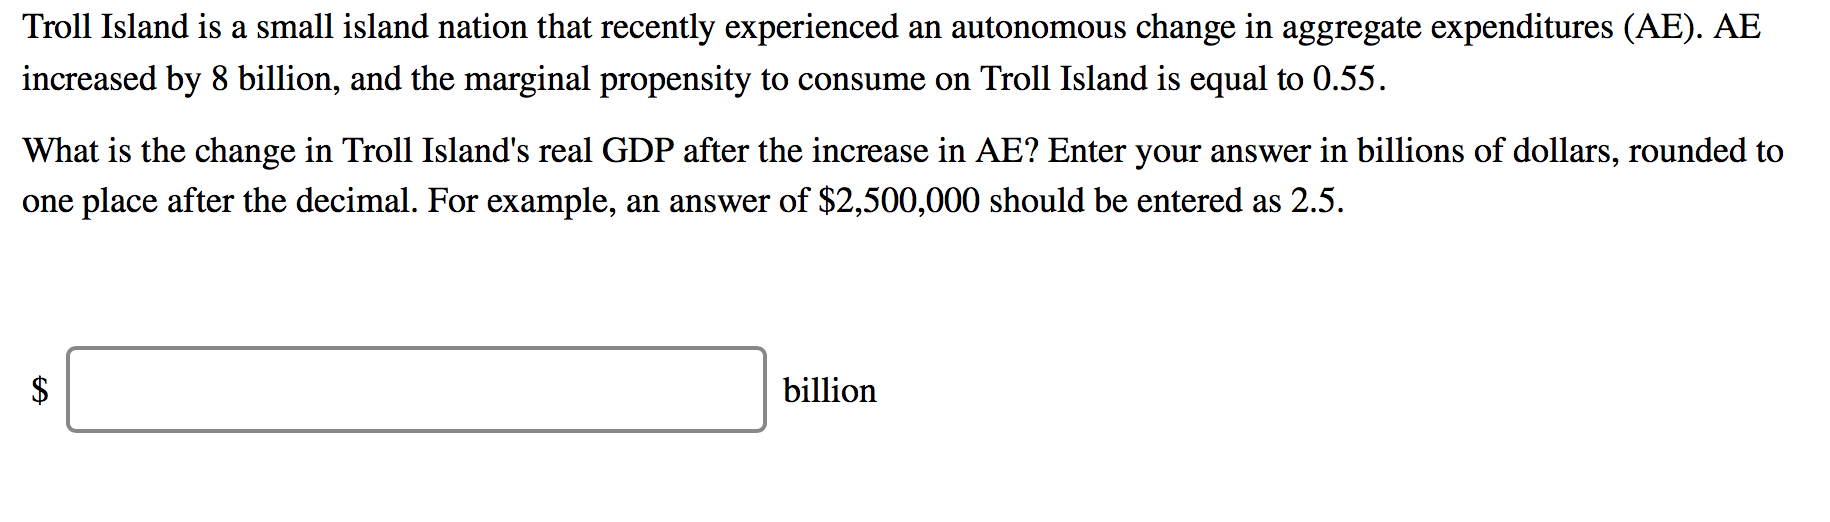 Troll Island is a small island nation that recently experienced an autonomous change in aggregate expenditures (AE). AE
increased by 8 billion, and the marginal propensity to consume on Troll Island is equal to 0.55.
What is the change in Troll Island's real GDP after the increase in AE? Enter your answer in billions of dollars, rounded to
one place after the decimal. For example, an answer of $2,500,000 should be entered as 2.5.
$
billion
